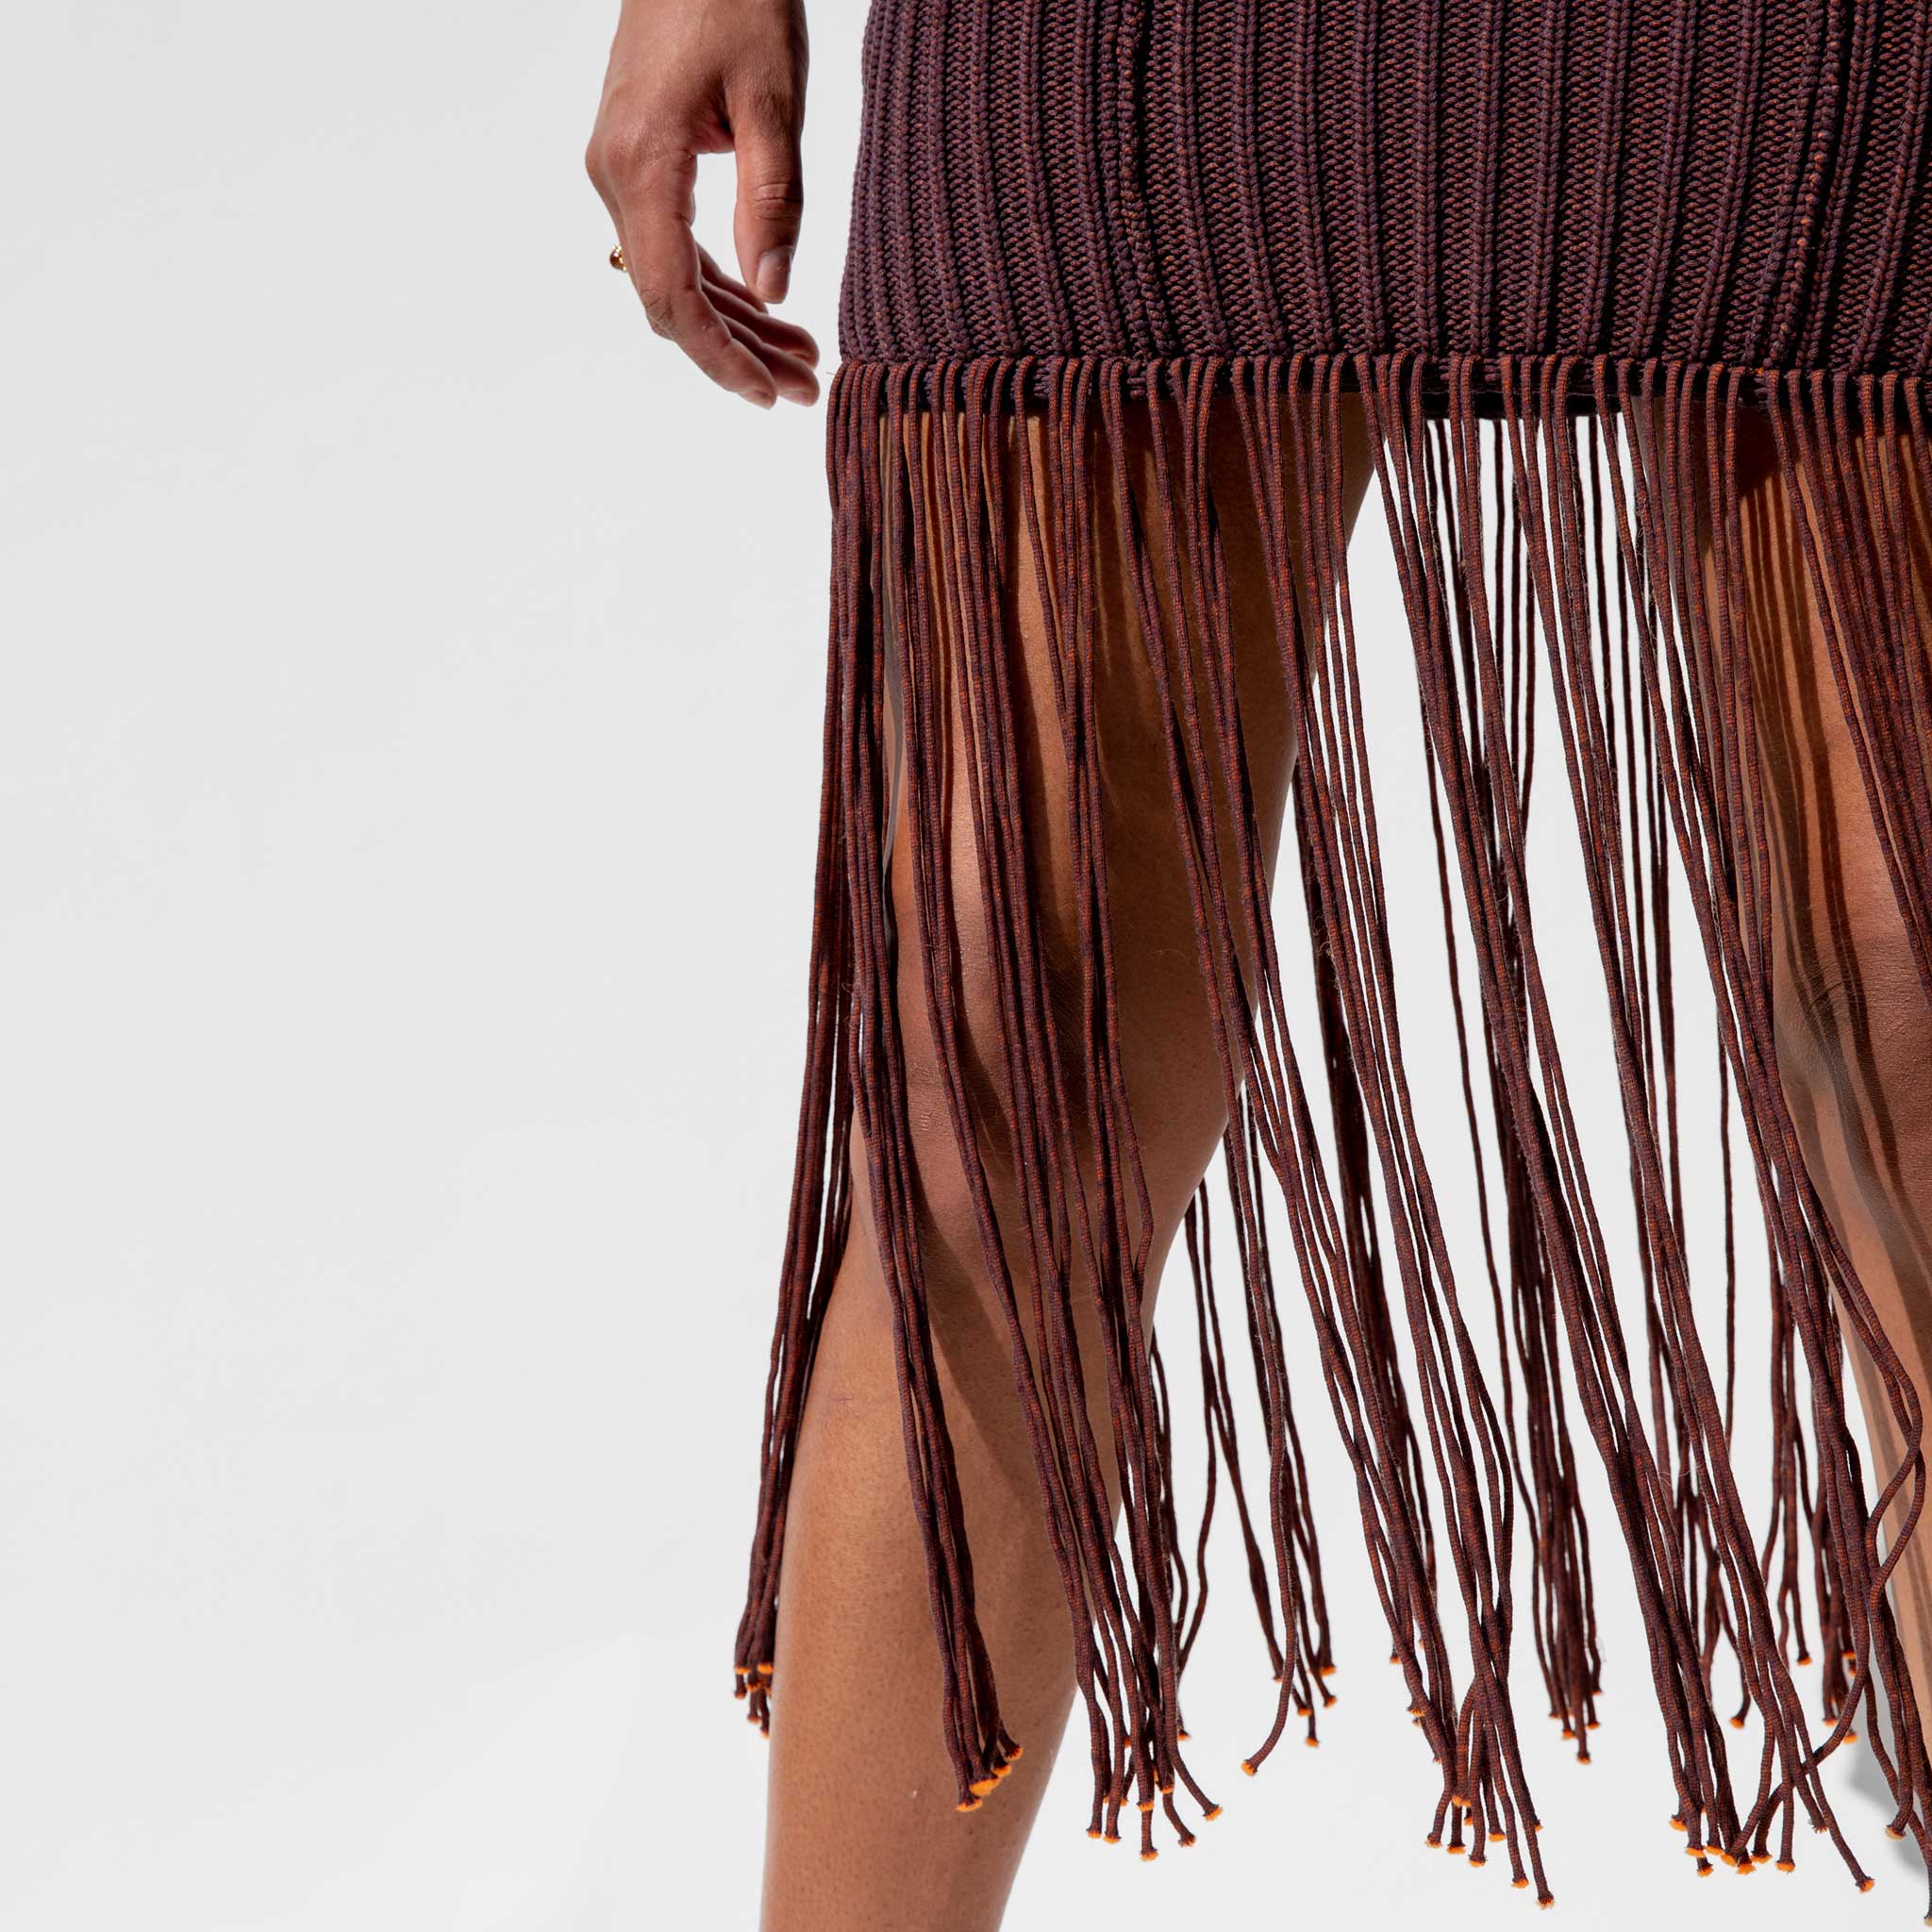 Close detail photo of the fringe on the Rope Dress - Oxblood